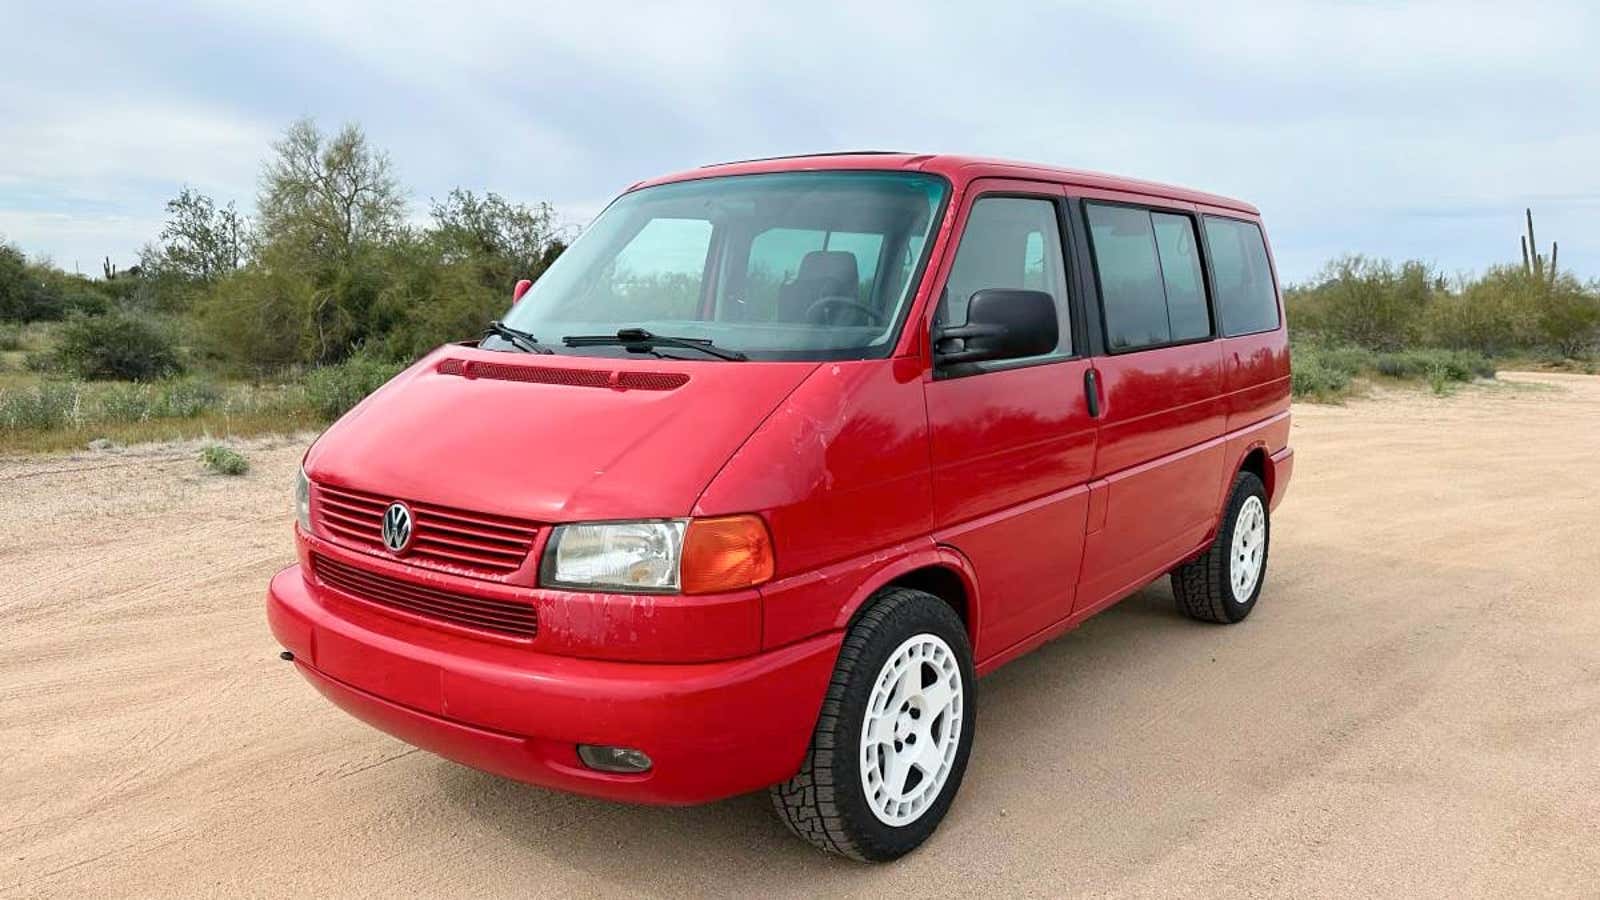 Image for At $12,500, Could This 2002 VW EuroVan Make A Van The Plan?